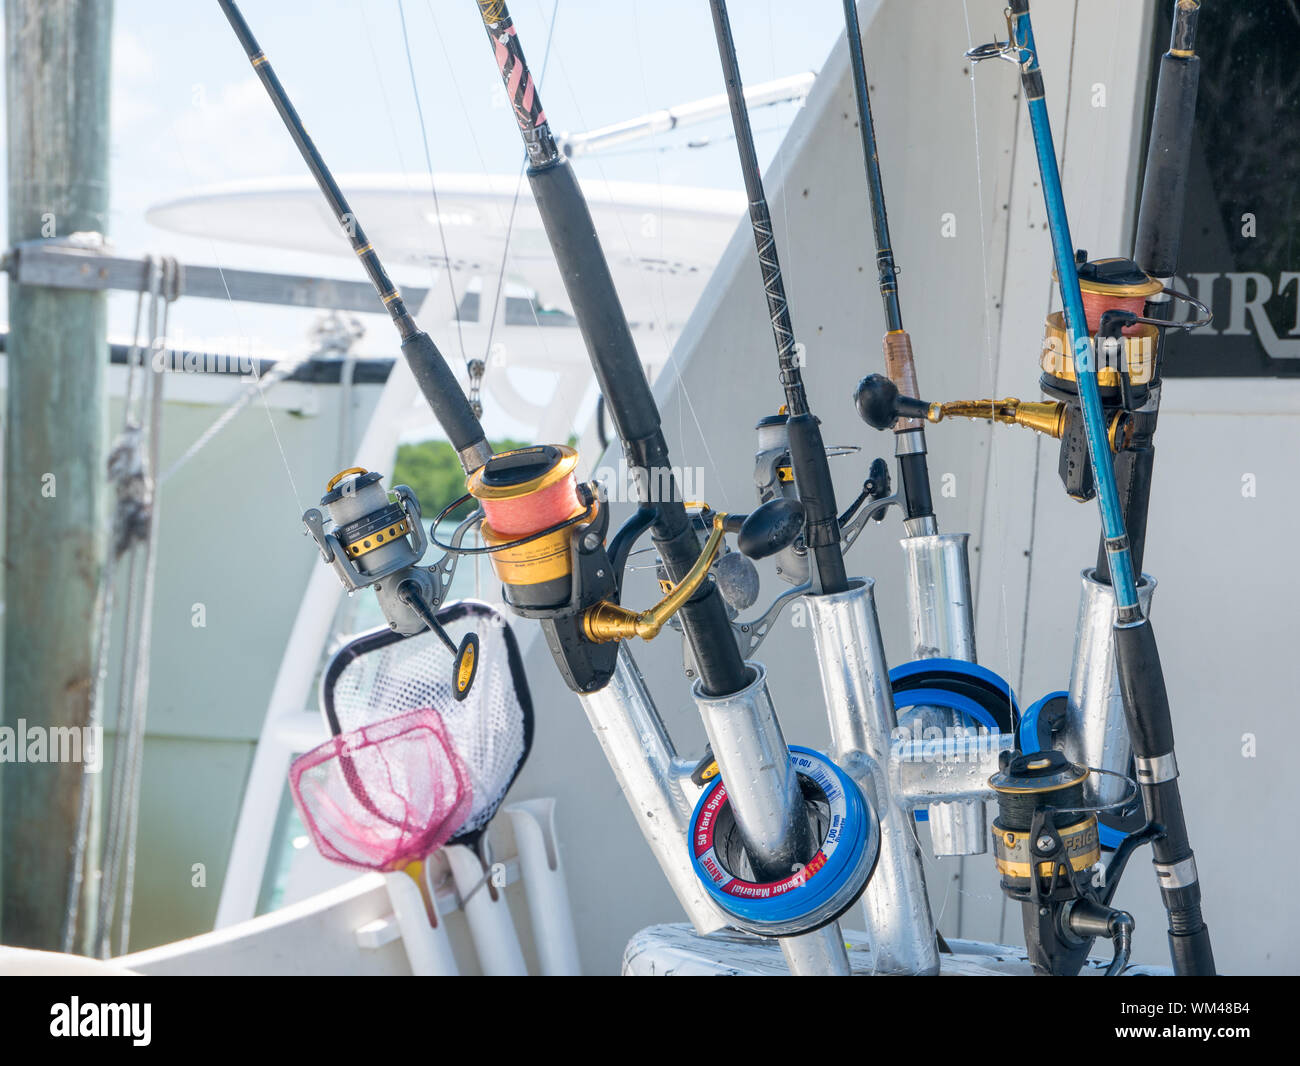 A Fishing Pole in Holder on a Boat Stock Image - Image of hobbies, hattie:  135077817